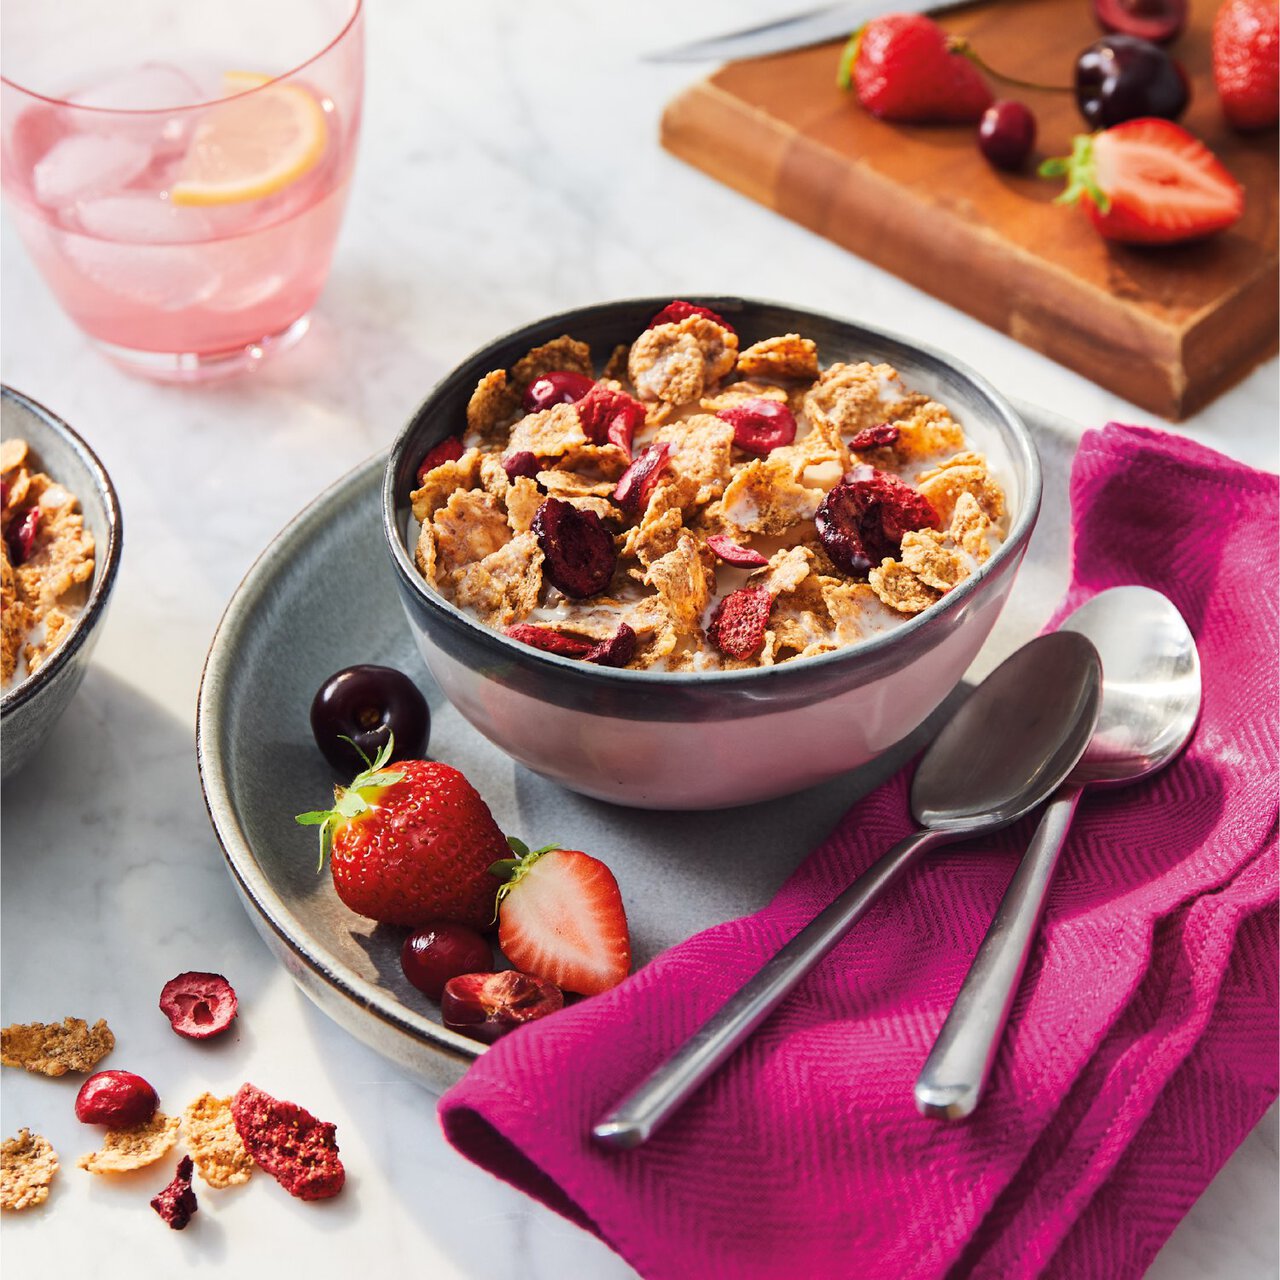 Kellogg's Special K Red Berries 500g